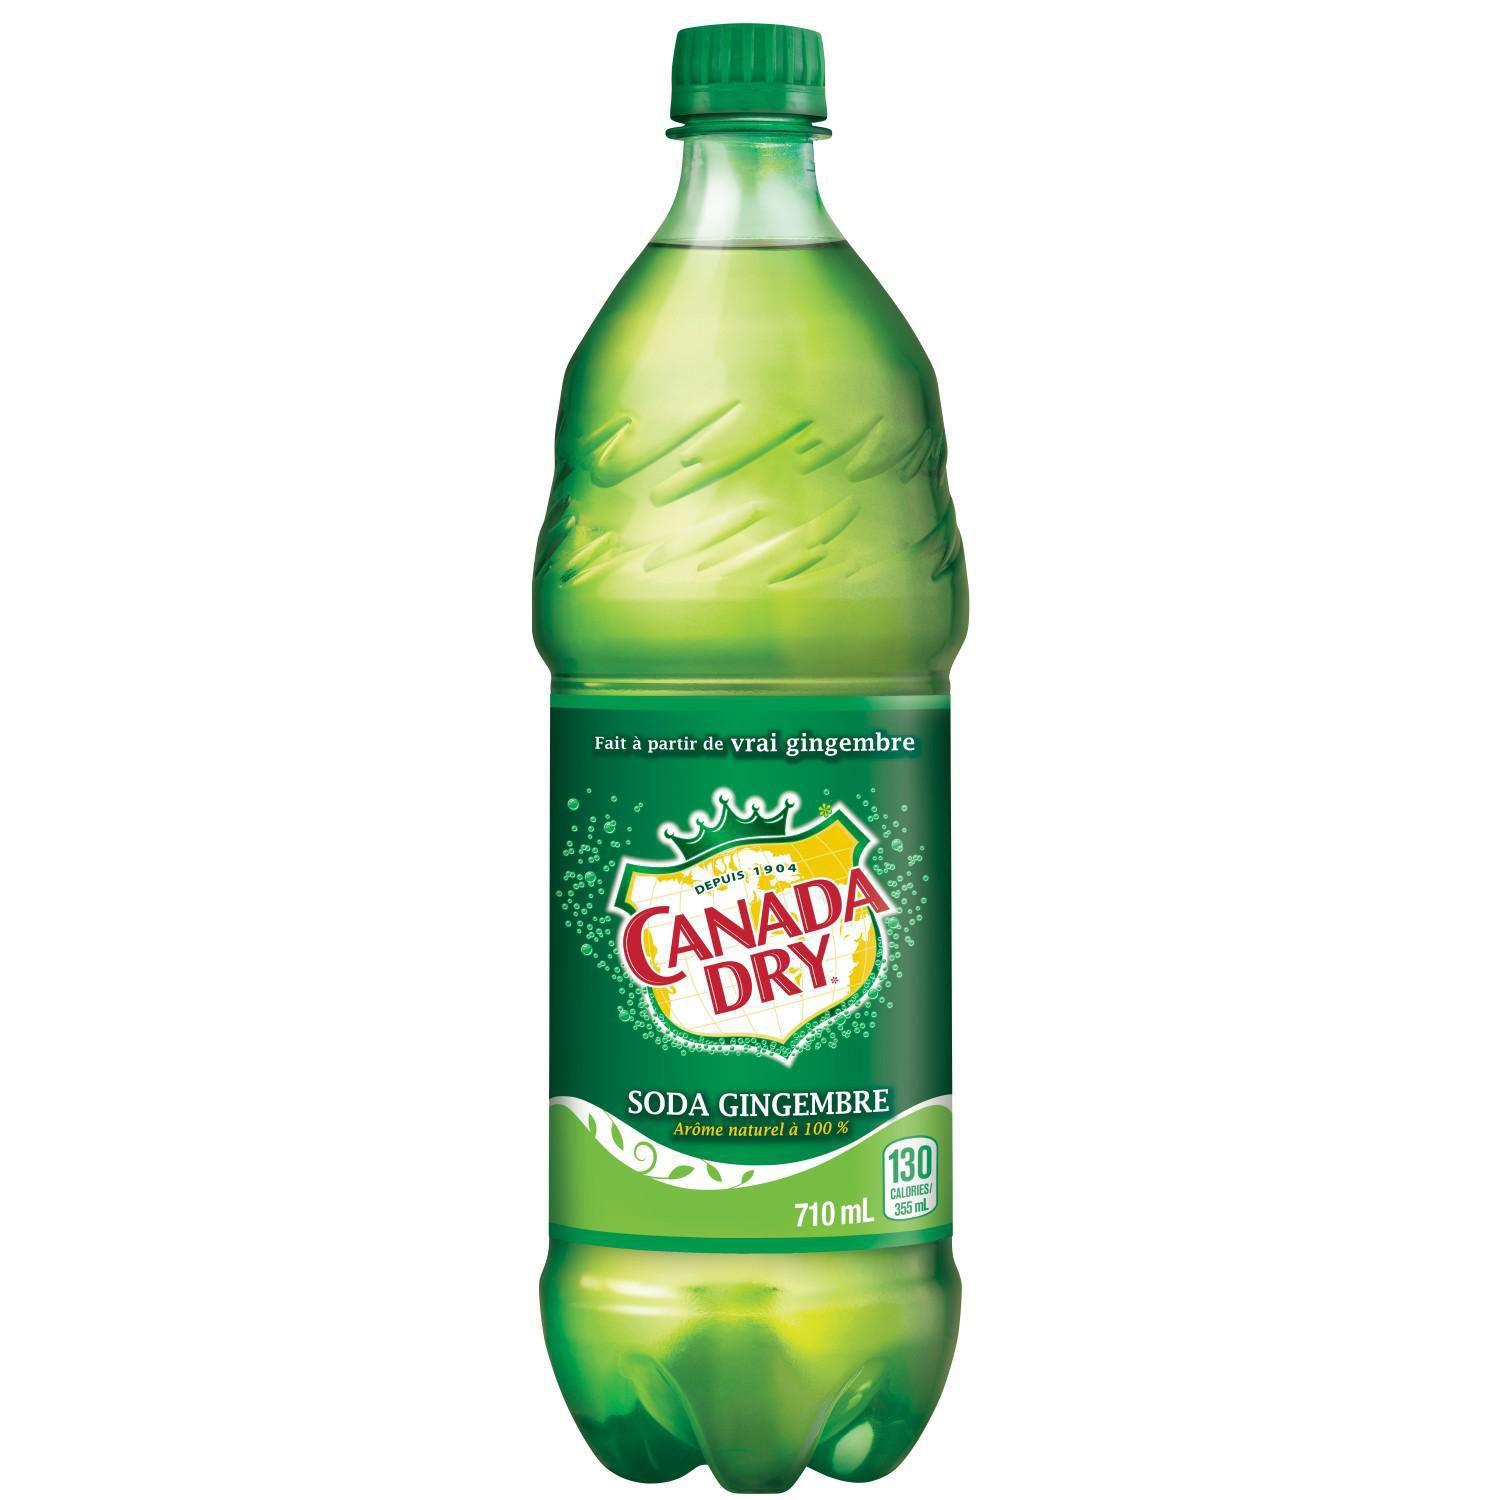 Canada Dry - Ginger Ale 710ml